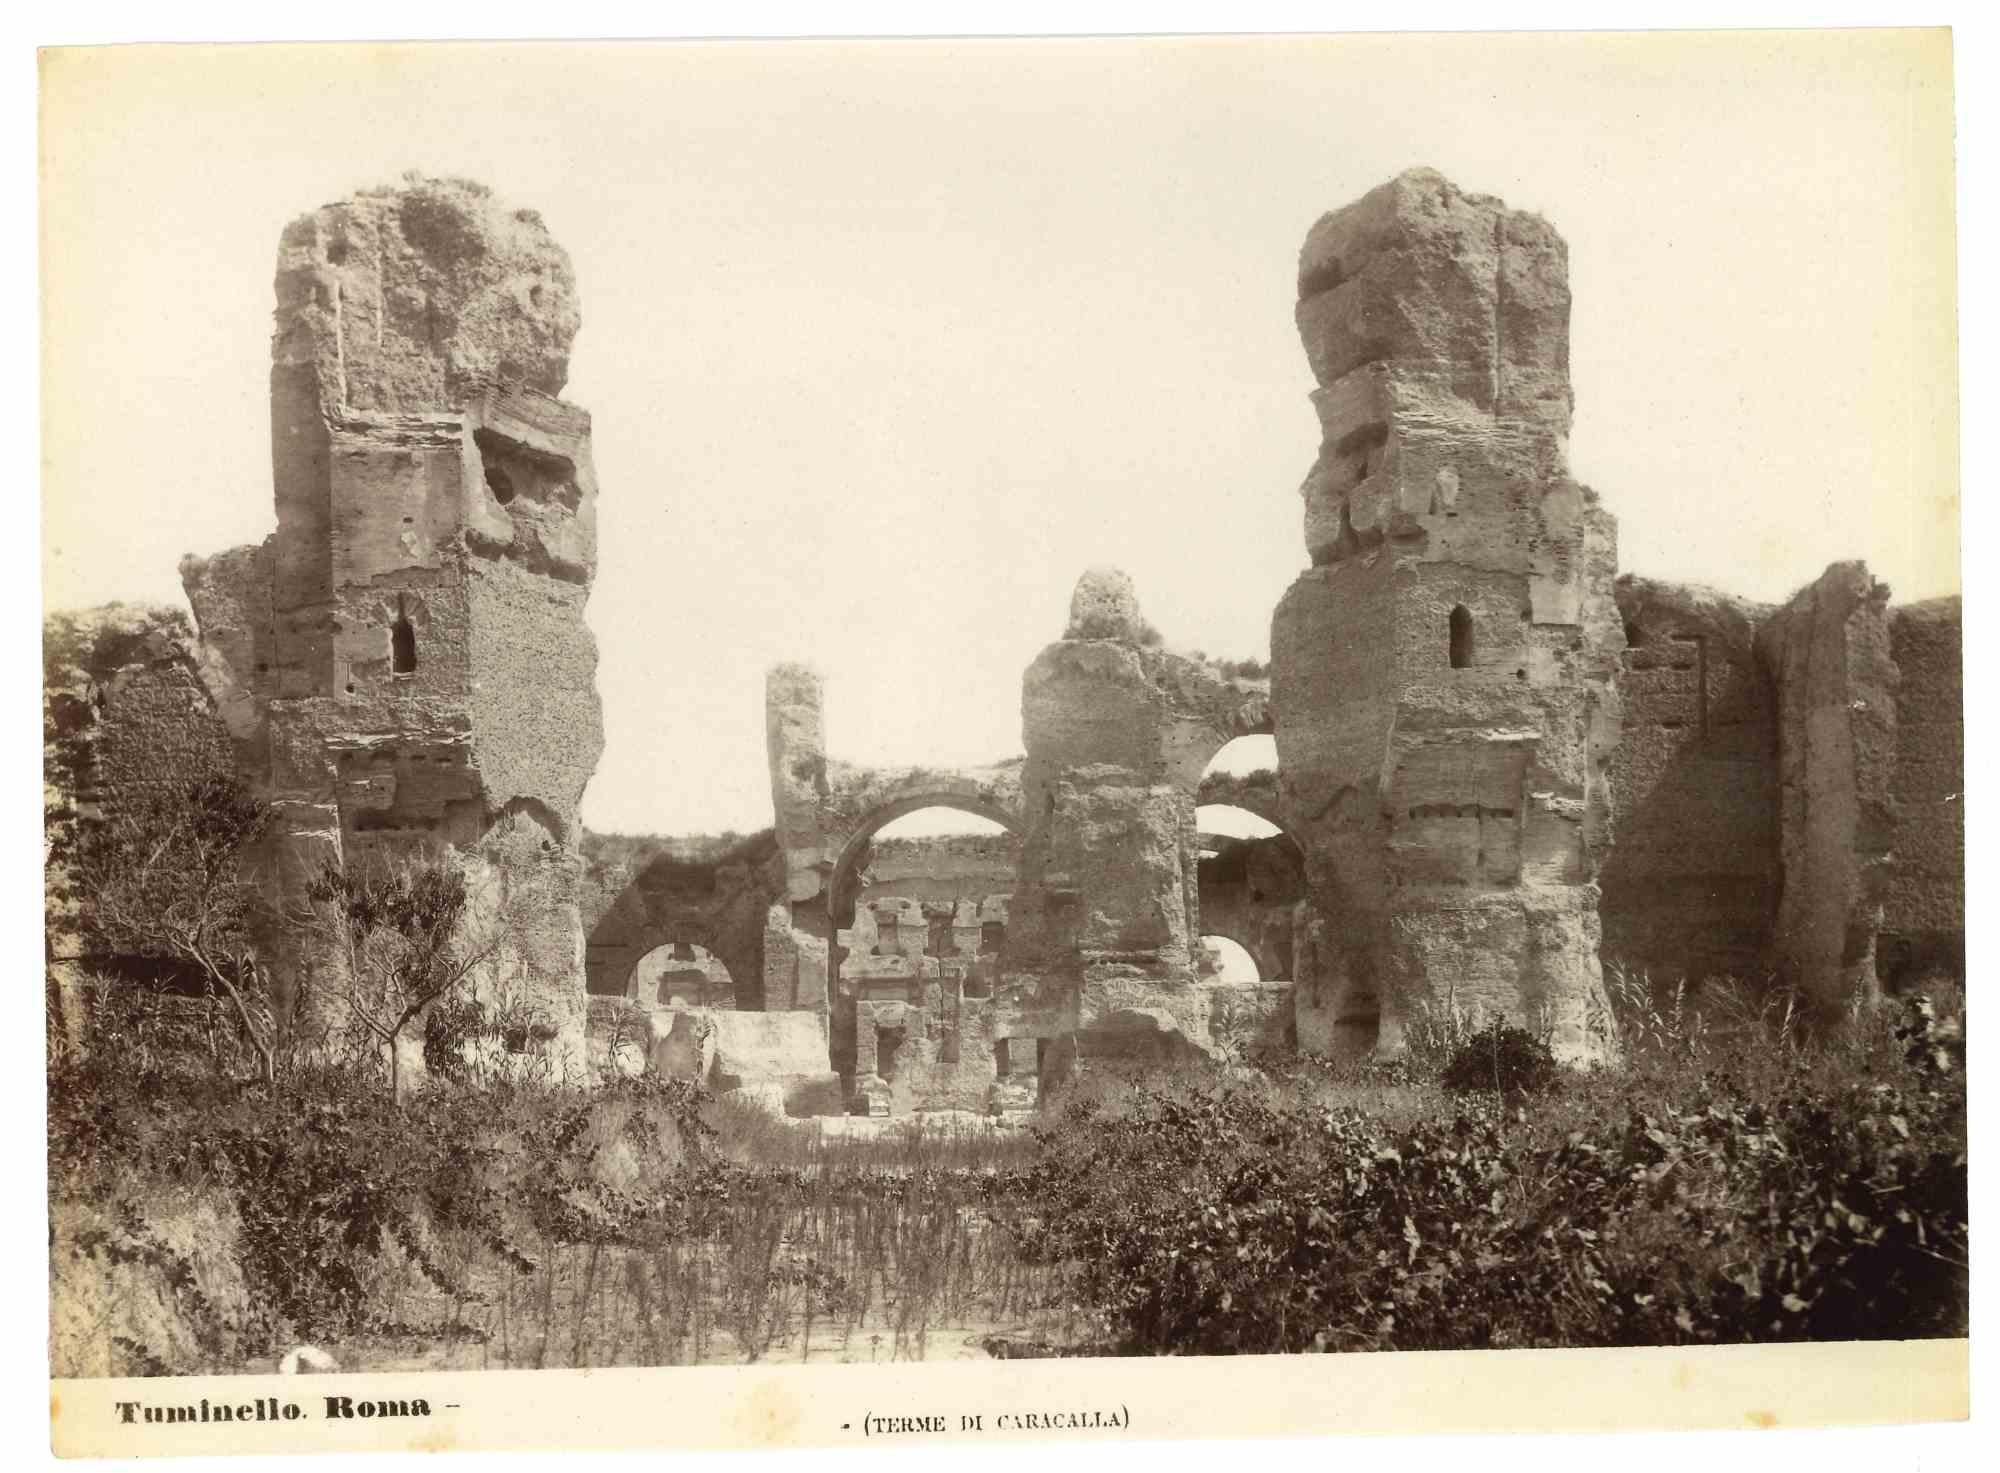 Baths of Caracalla - Vintage Photography L. Tuminello - Early 20th Century